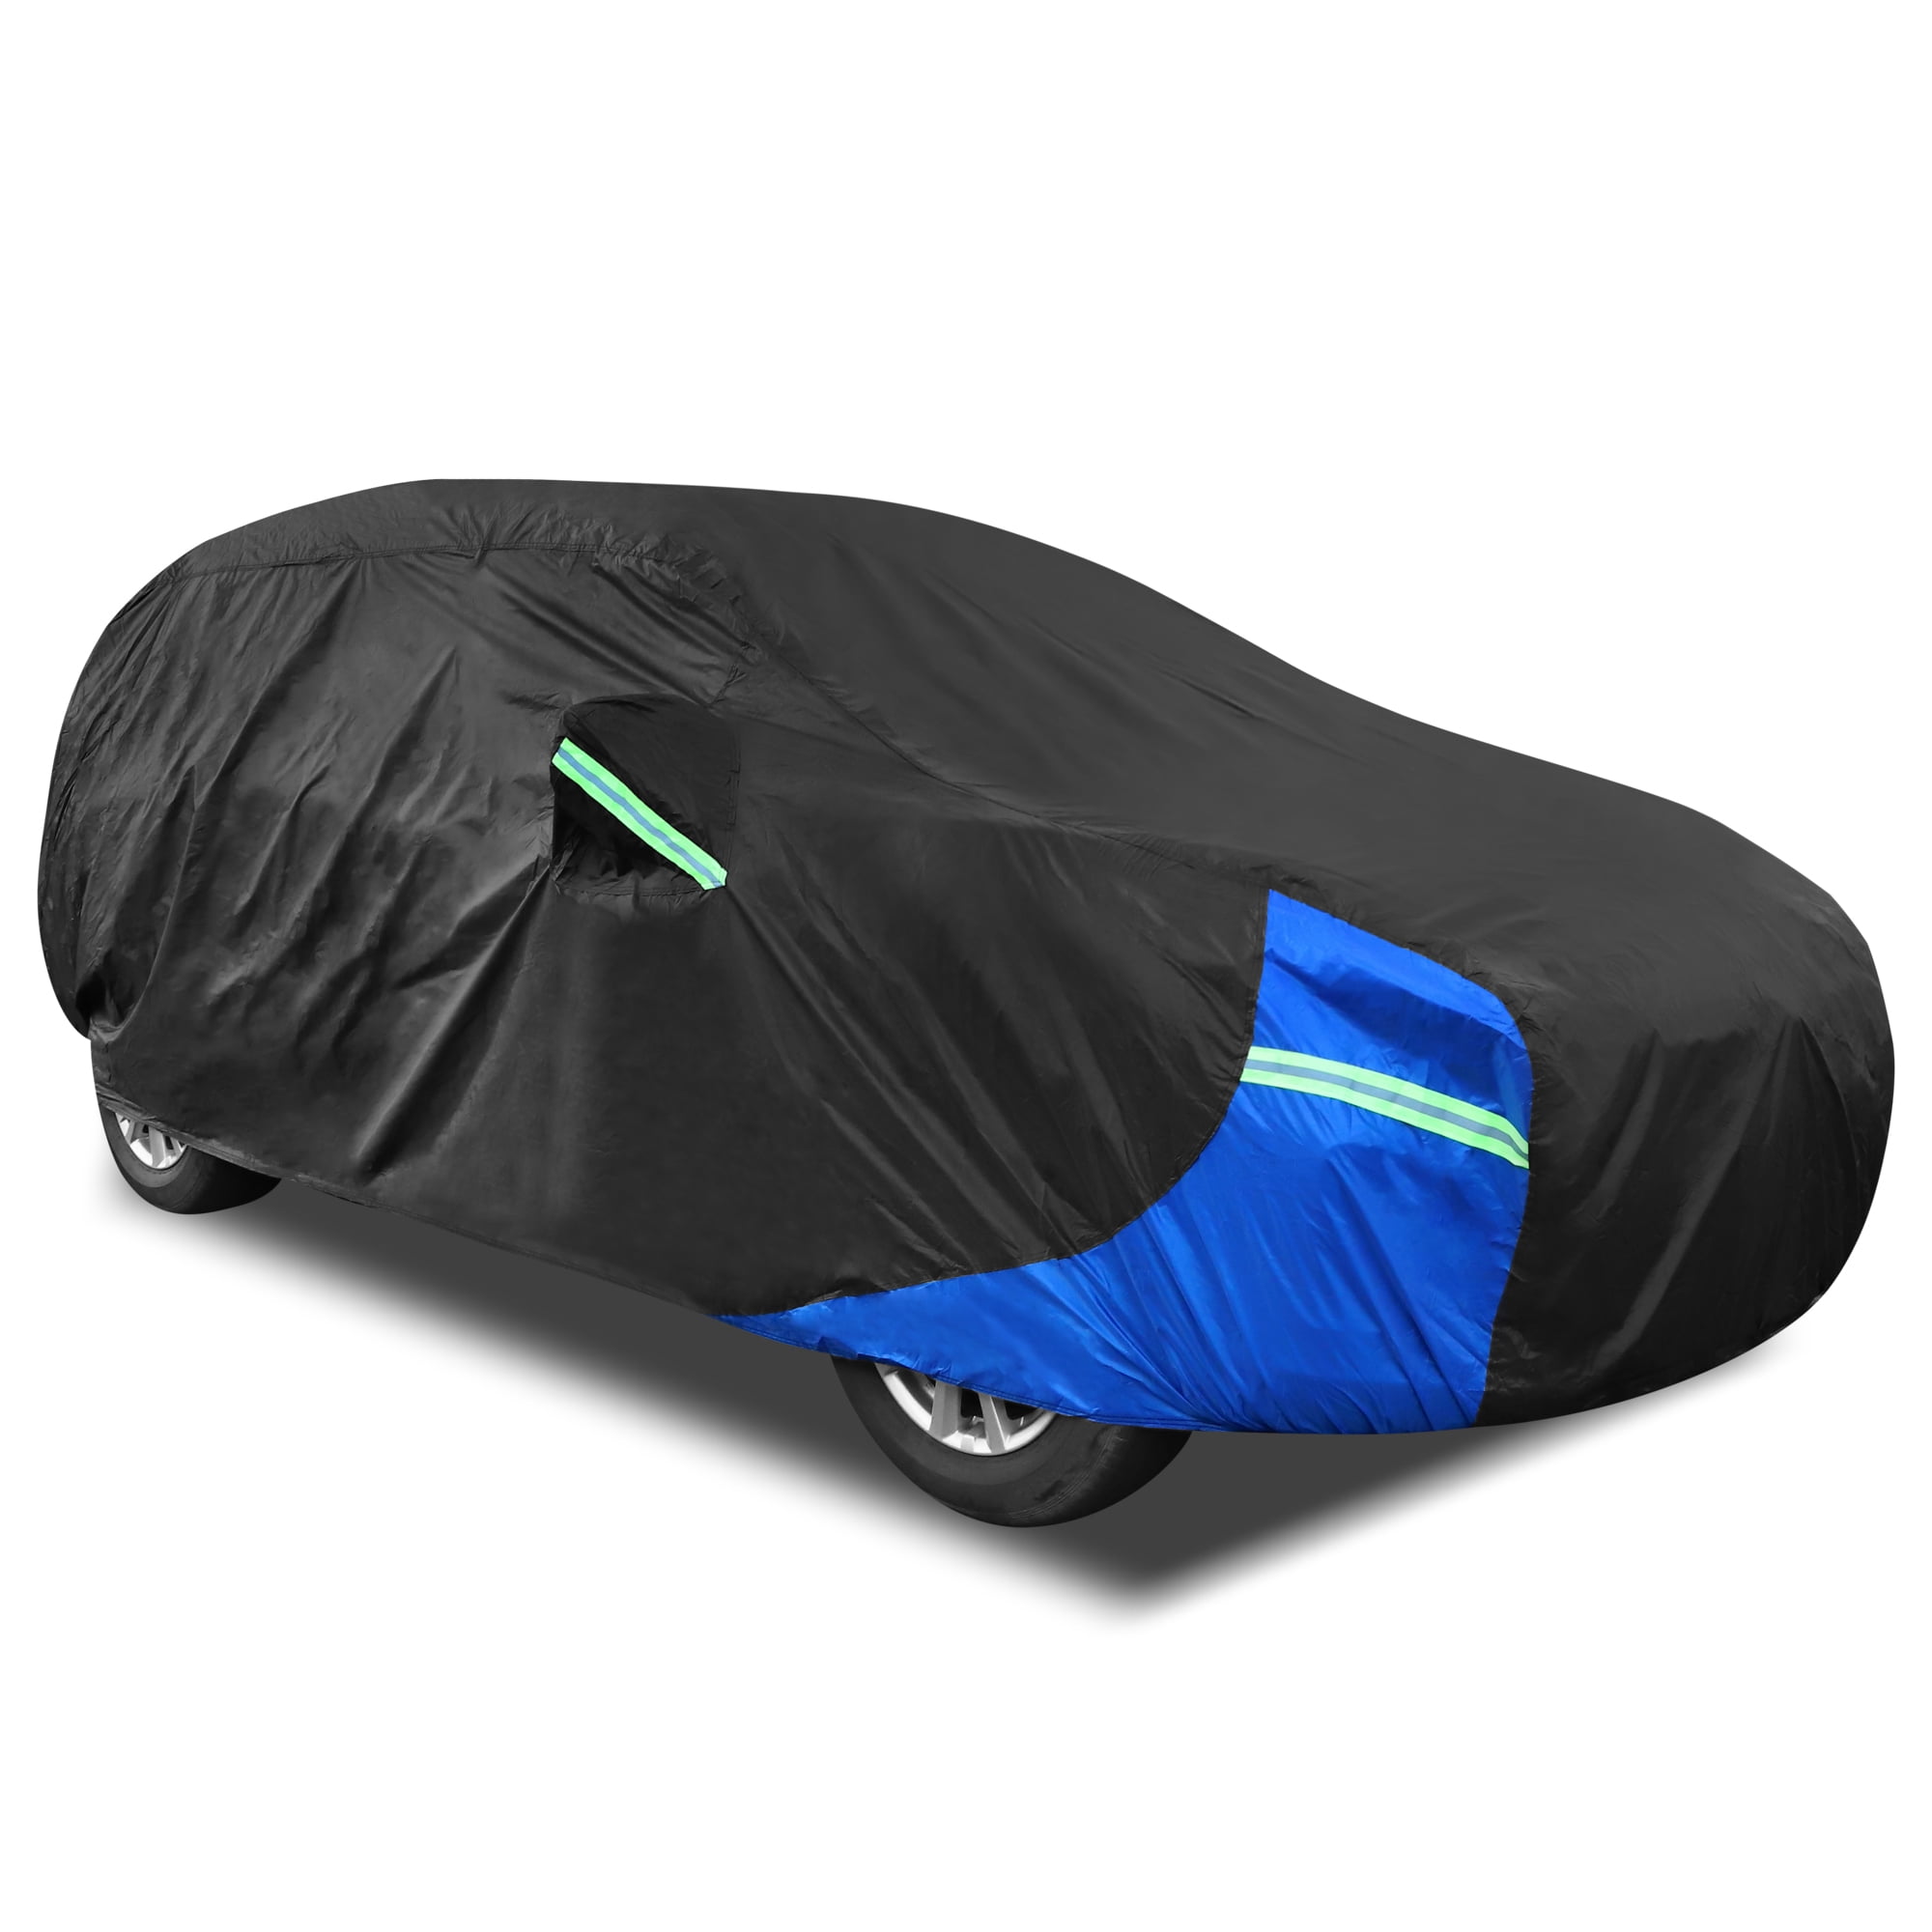 Unique Bargains Yl Car Cover Waterproof Snowproof All Weather For